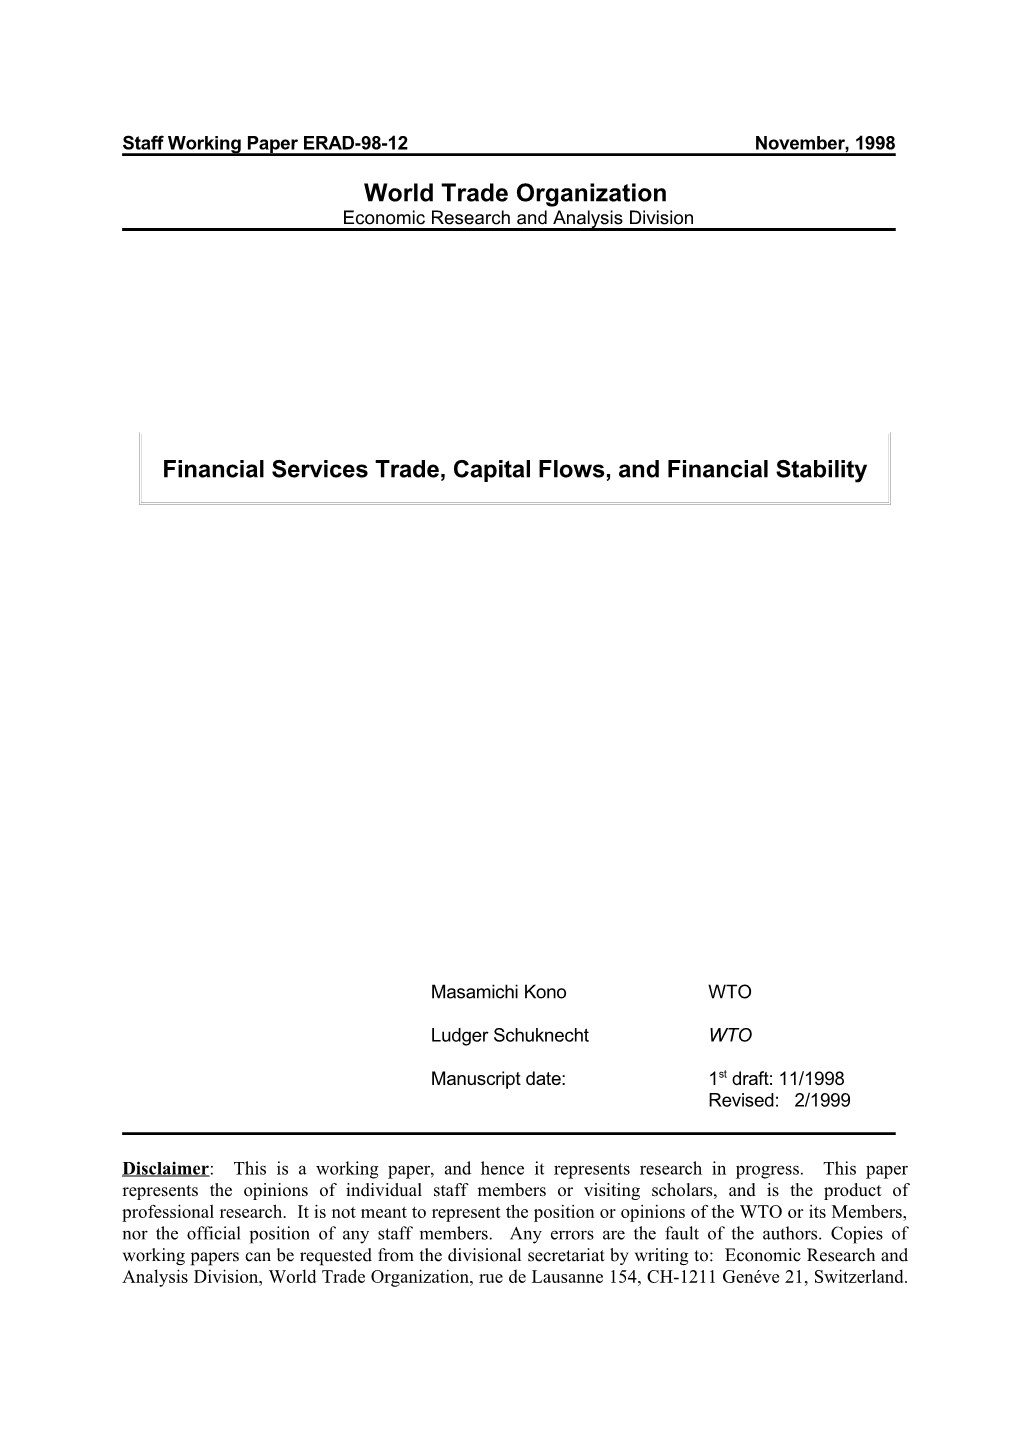 Commitments Towards Financial Services Trade Liberalization, Capital Flows